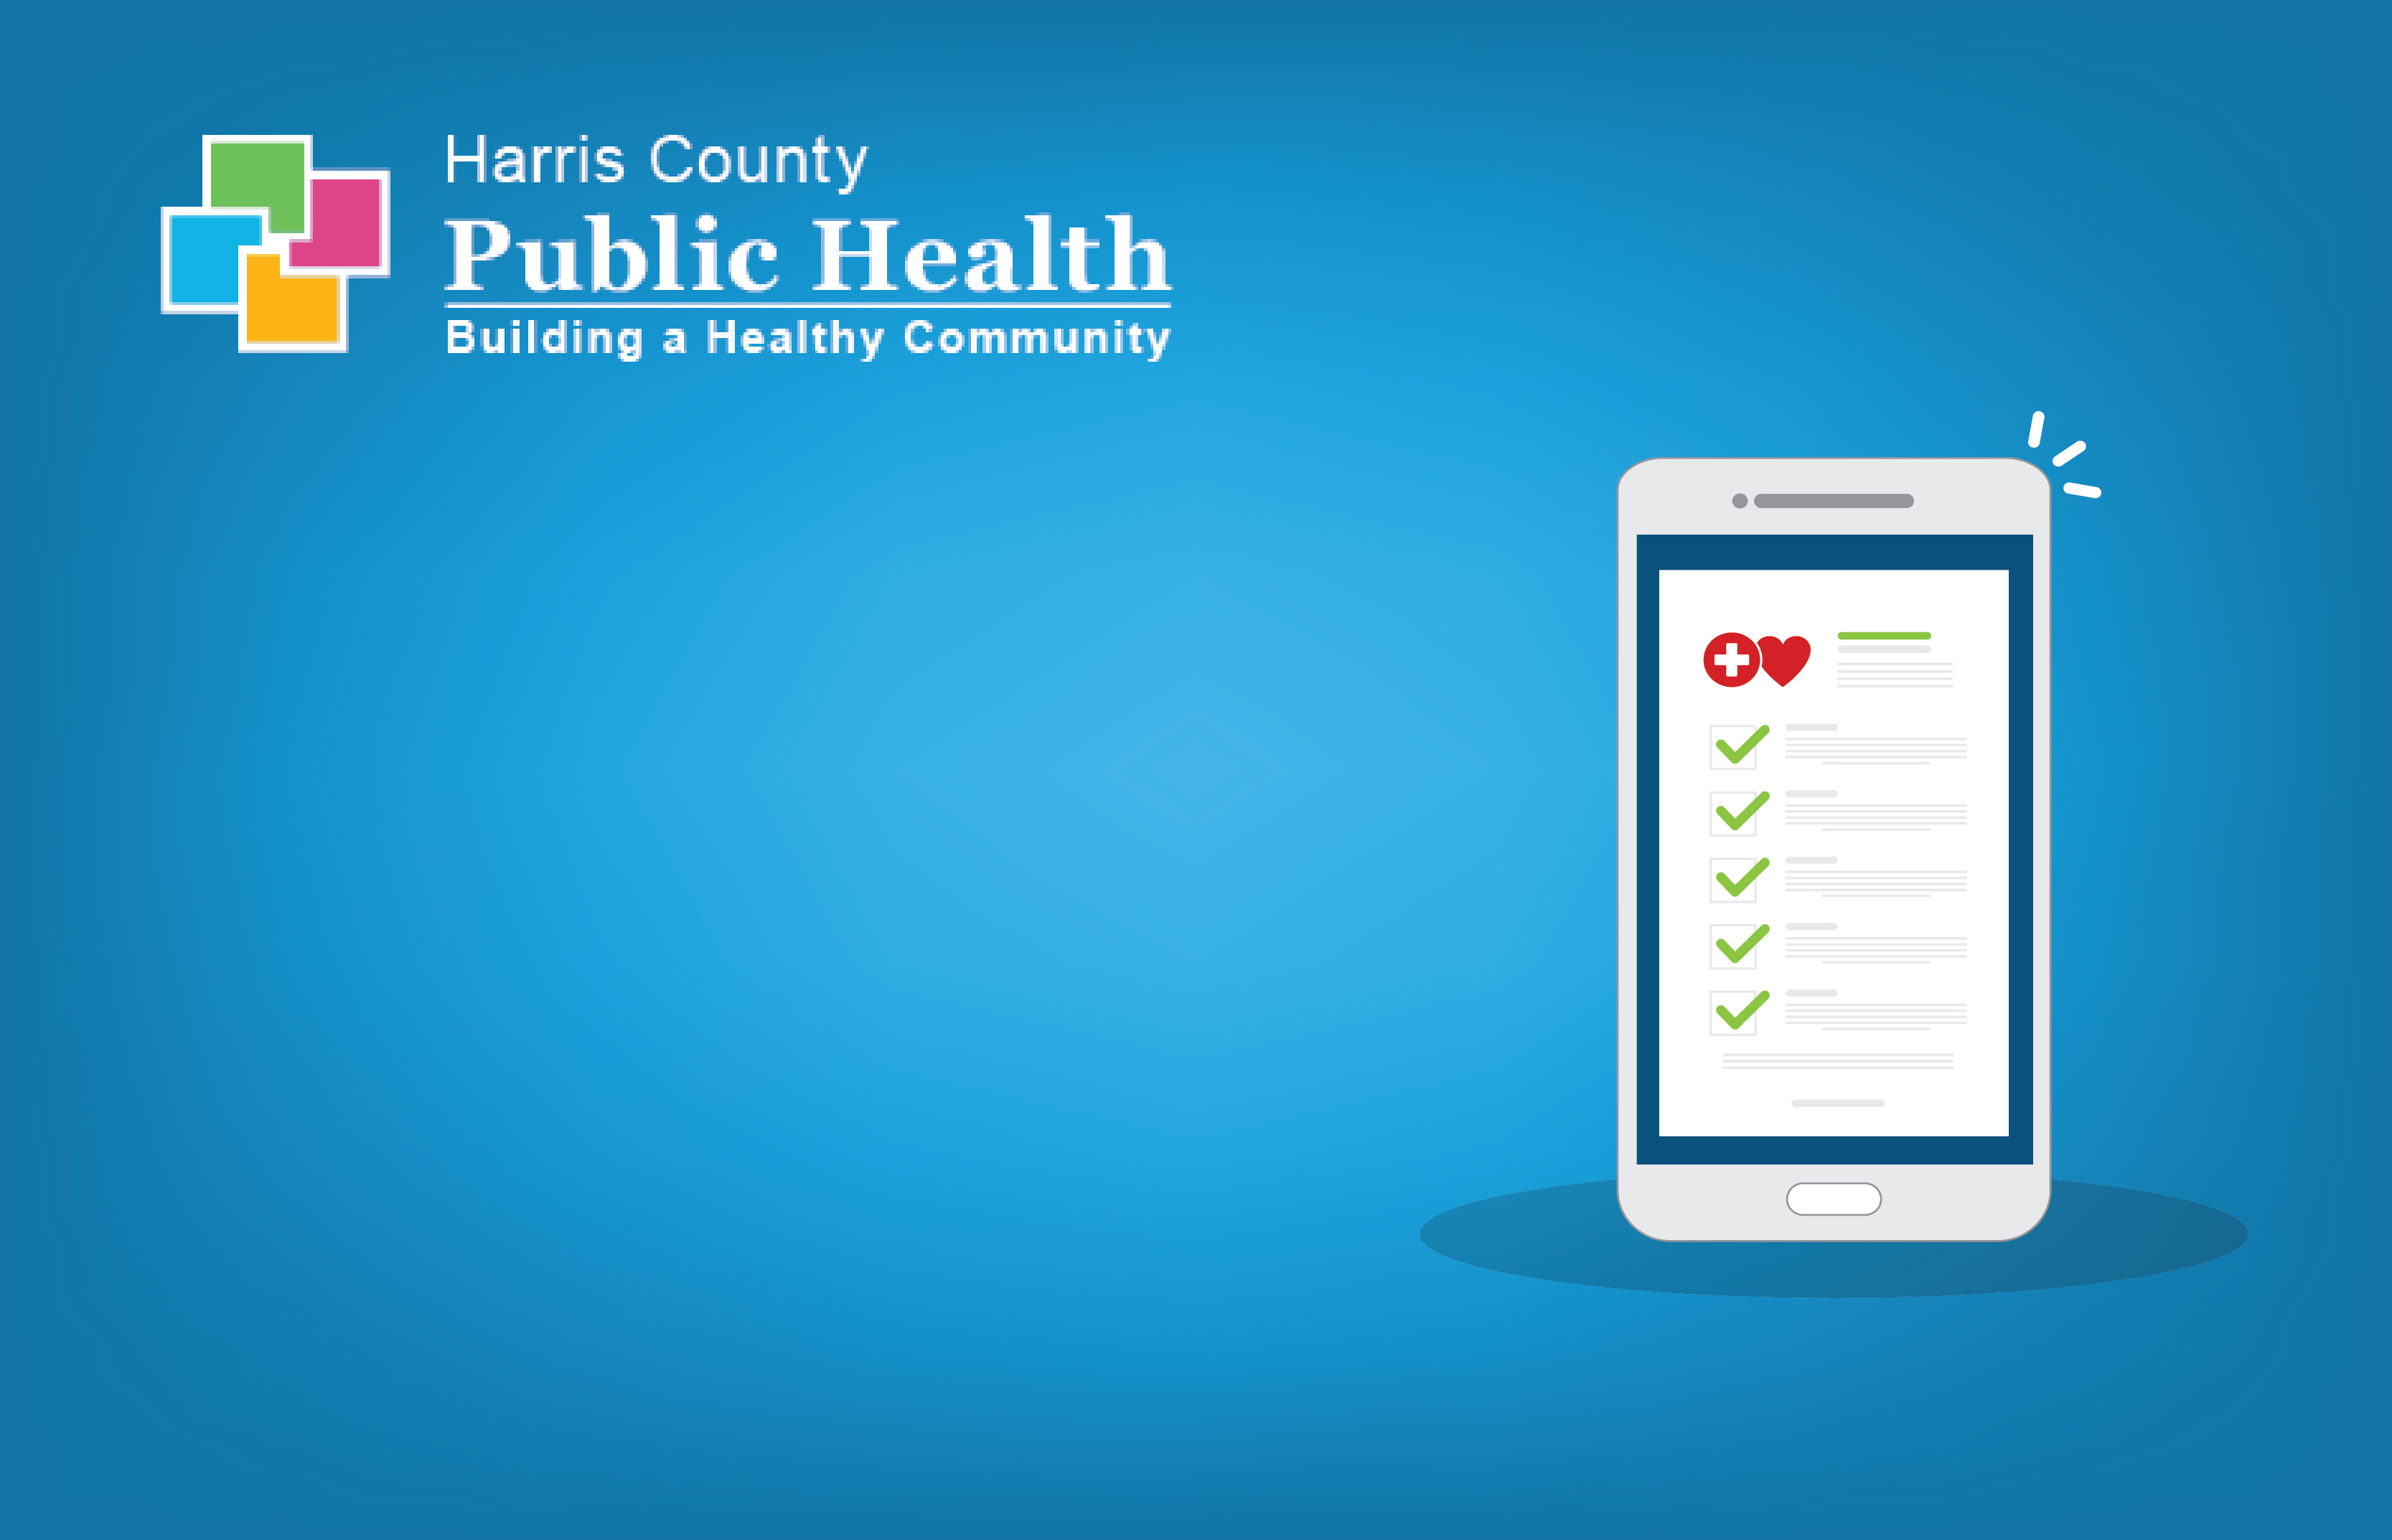 Harris County Public Health Promotes Community Engagement for a Healthier Future